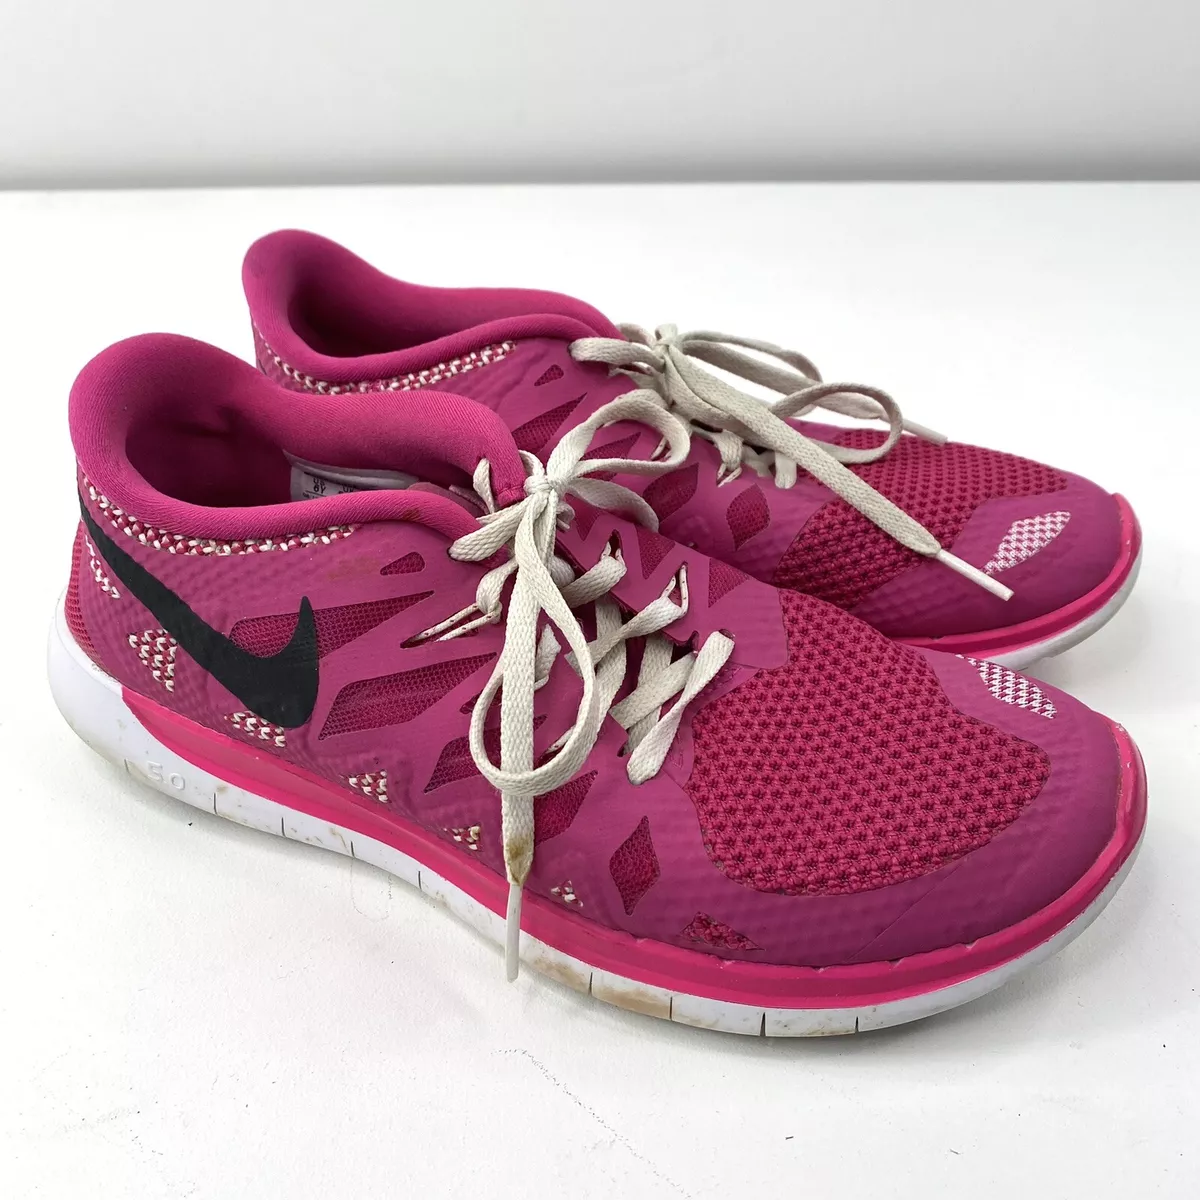 Contando insectos disco Masacre NIKE Free Run 5.0 Running Shoes Sneakers Pink Girls Youth Size 6 | eBay